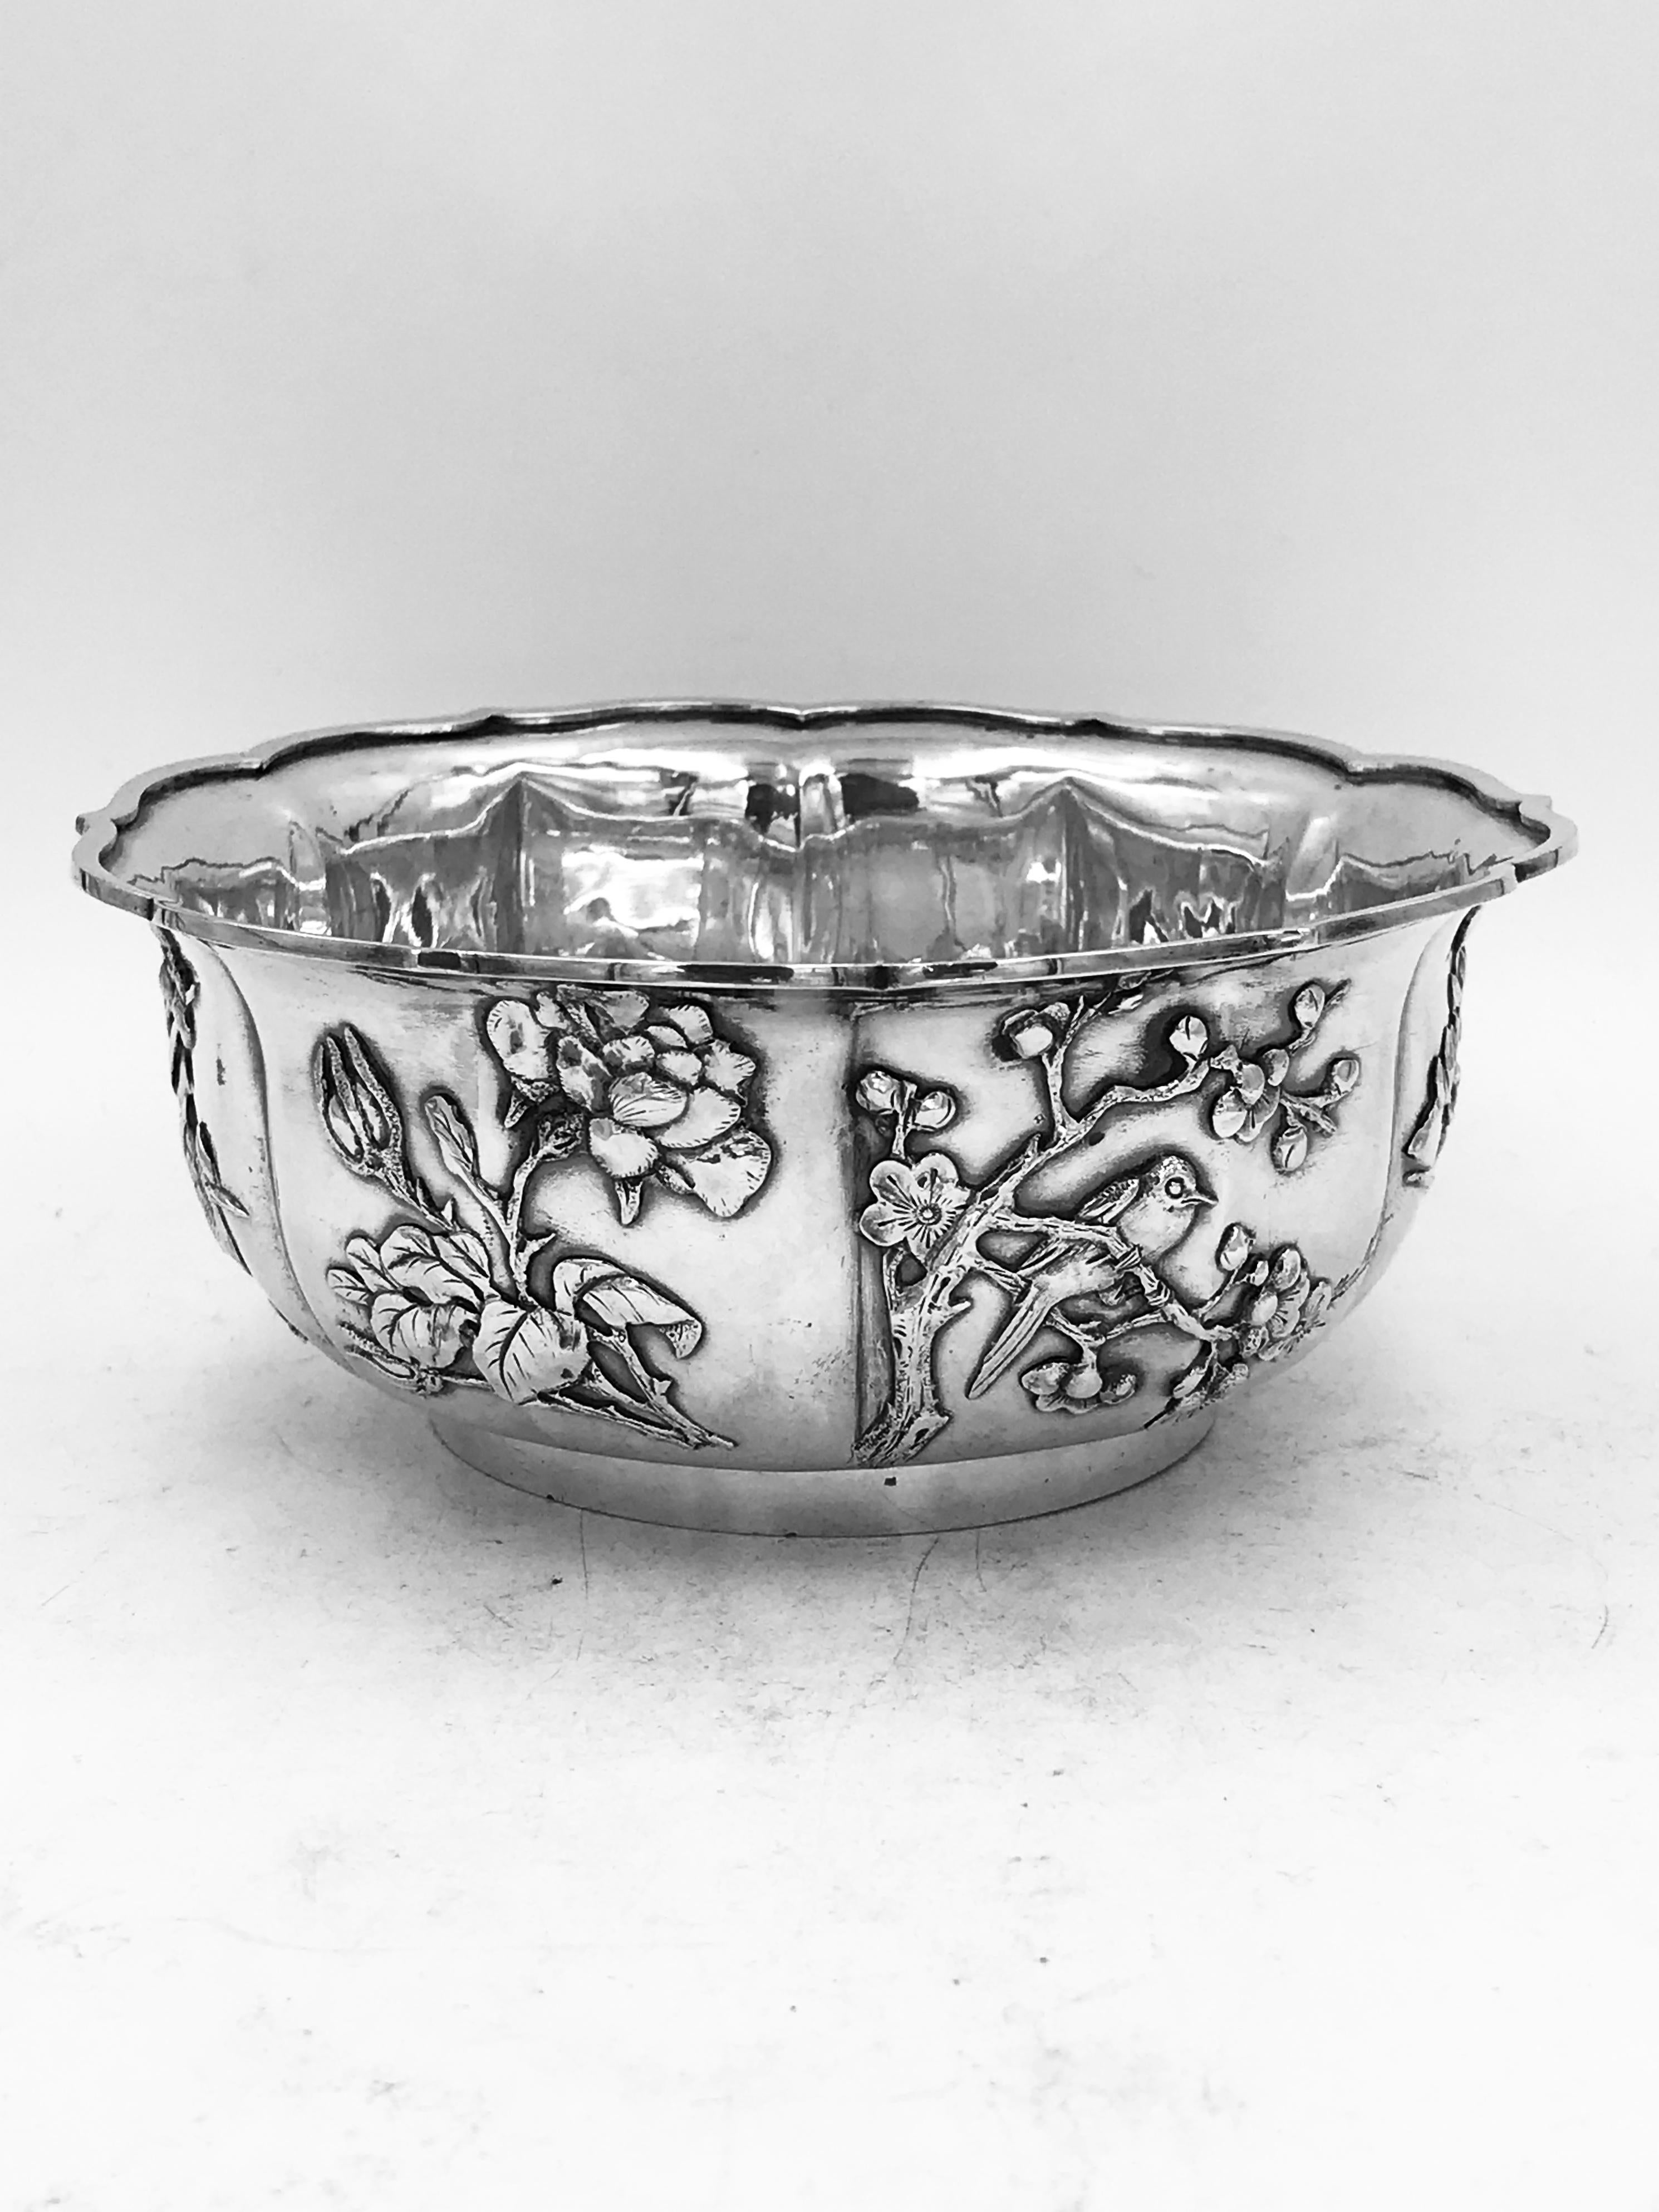 19th Century Chinese Export Silver Bowl For Sale